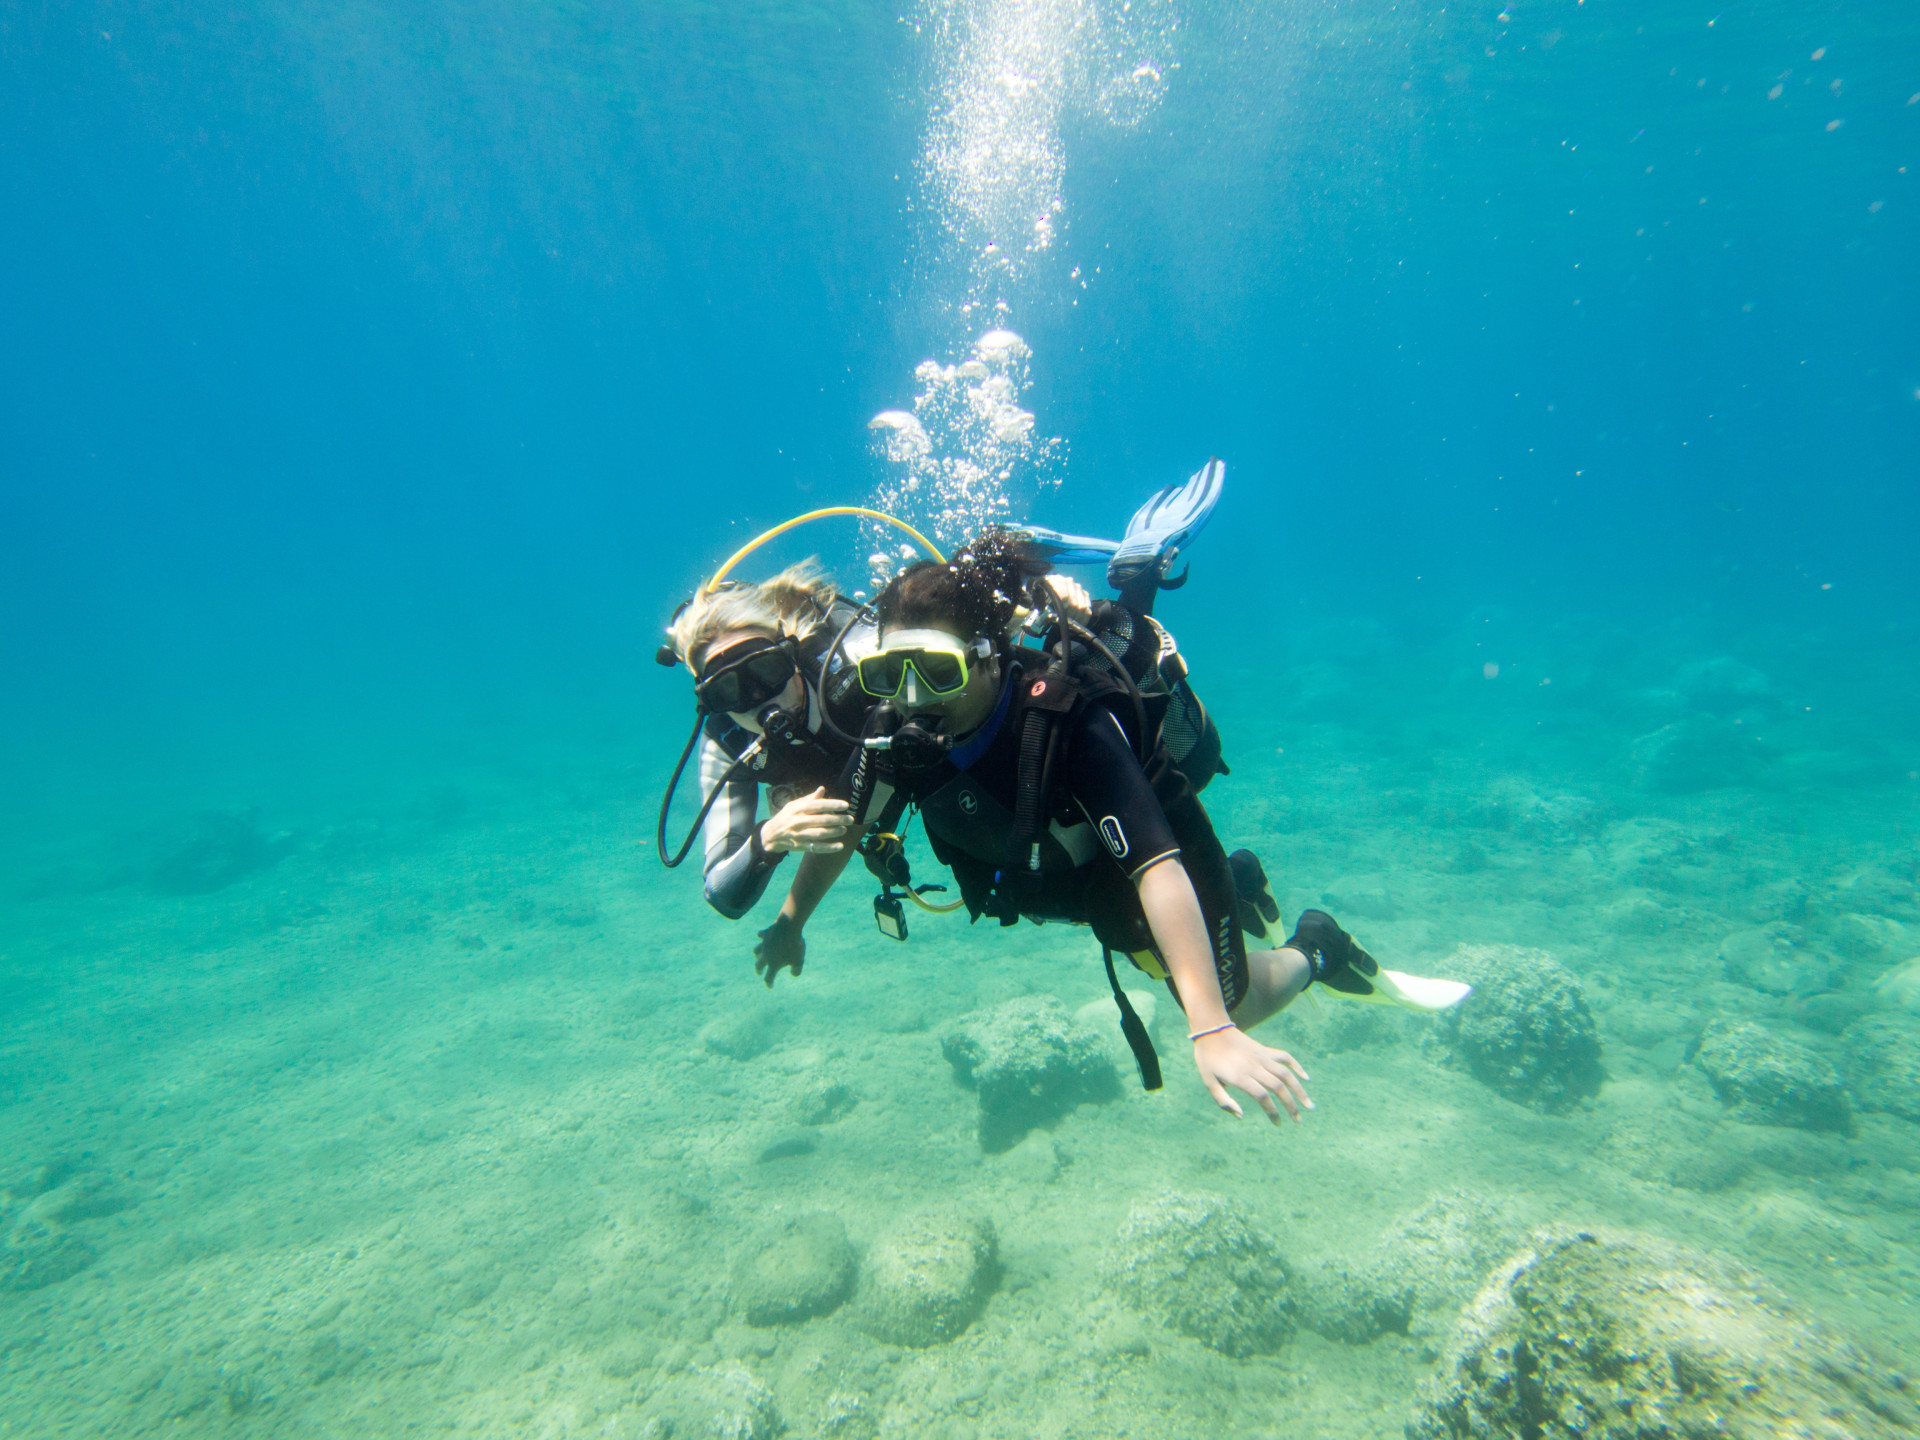 If you're into diving and traveling the world, then becoming an instructor is a great way to combine both.<p><a href="https://www.msn.com/en-in/community/channel/vid-7xx8mnucu55yw63we9va2gwr7uihbxwc68fxqp25x6tg4ftibpra?cvid=94631541bc0f4f89bfd59158d696ad7e">Follow us and access great exclusive content every day</a></p>